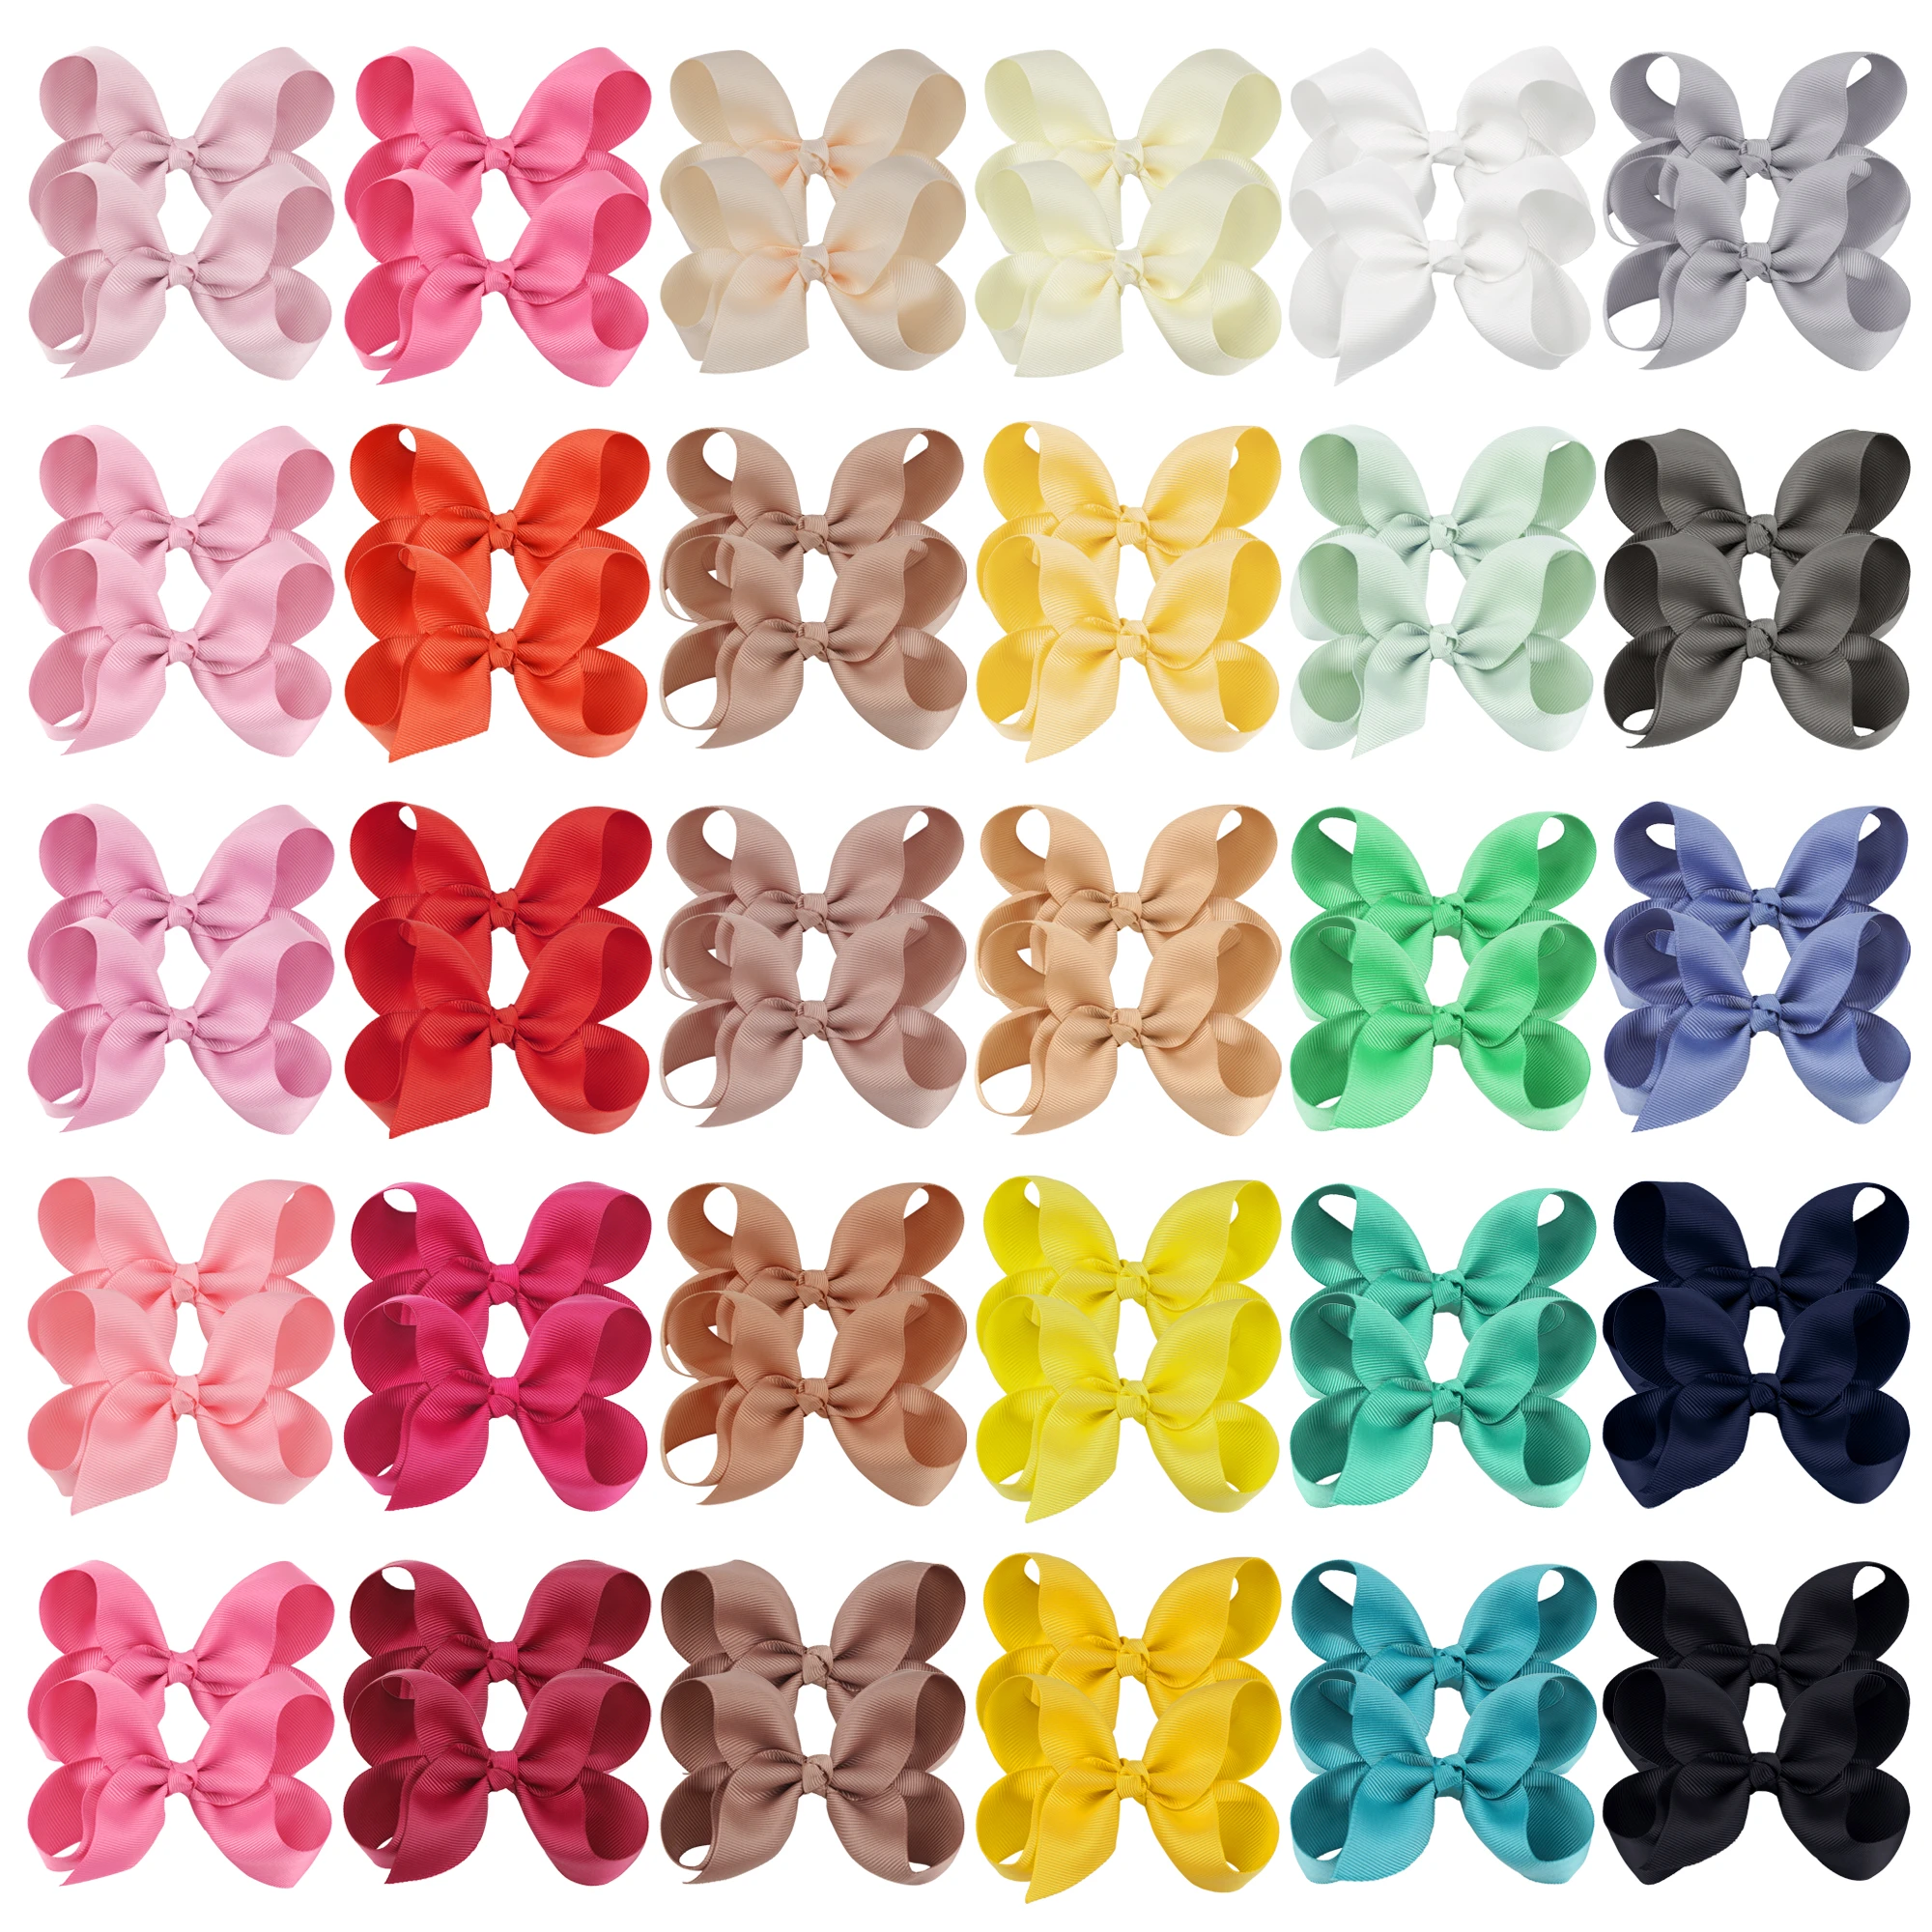 40pcs 4.5 Inch Kid Girls Large Ribbon Hair Bows Clips Accessories for Toddlers Kids Girls hair Accessories